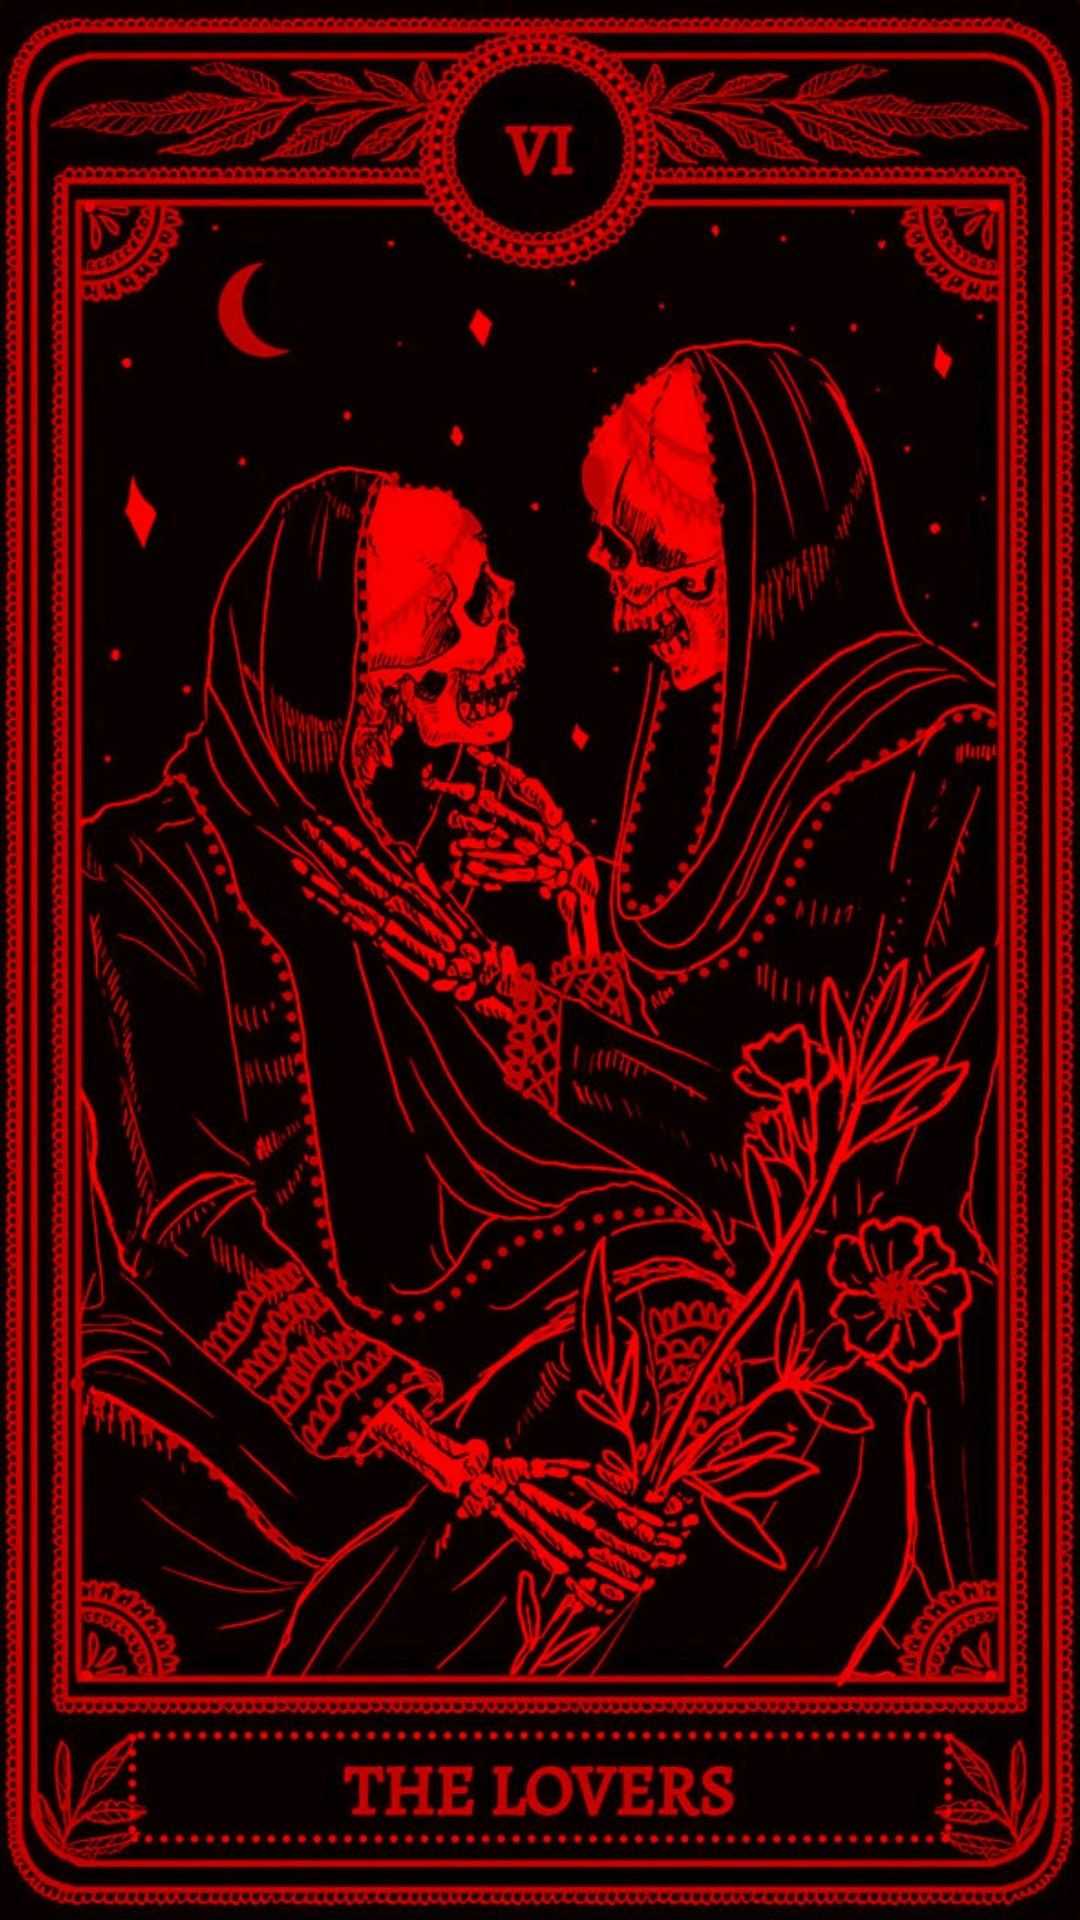 Red Gothic Background